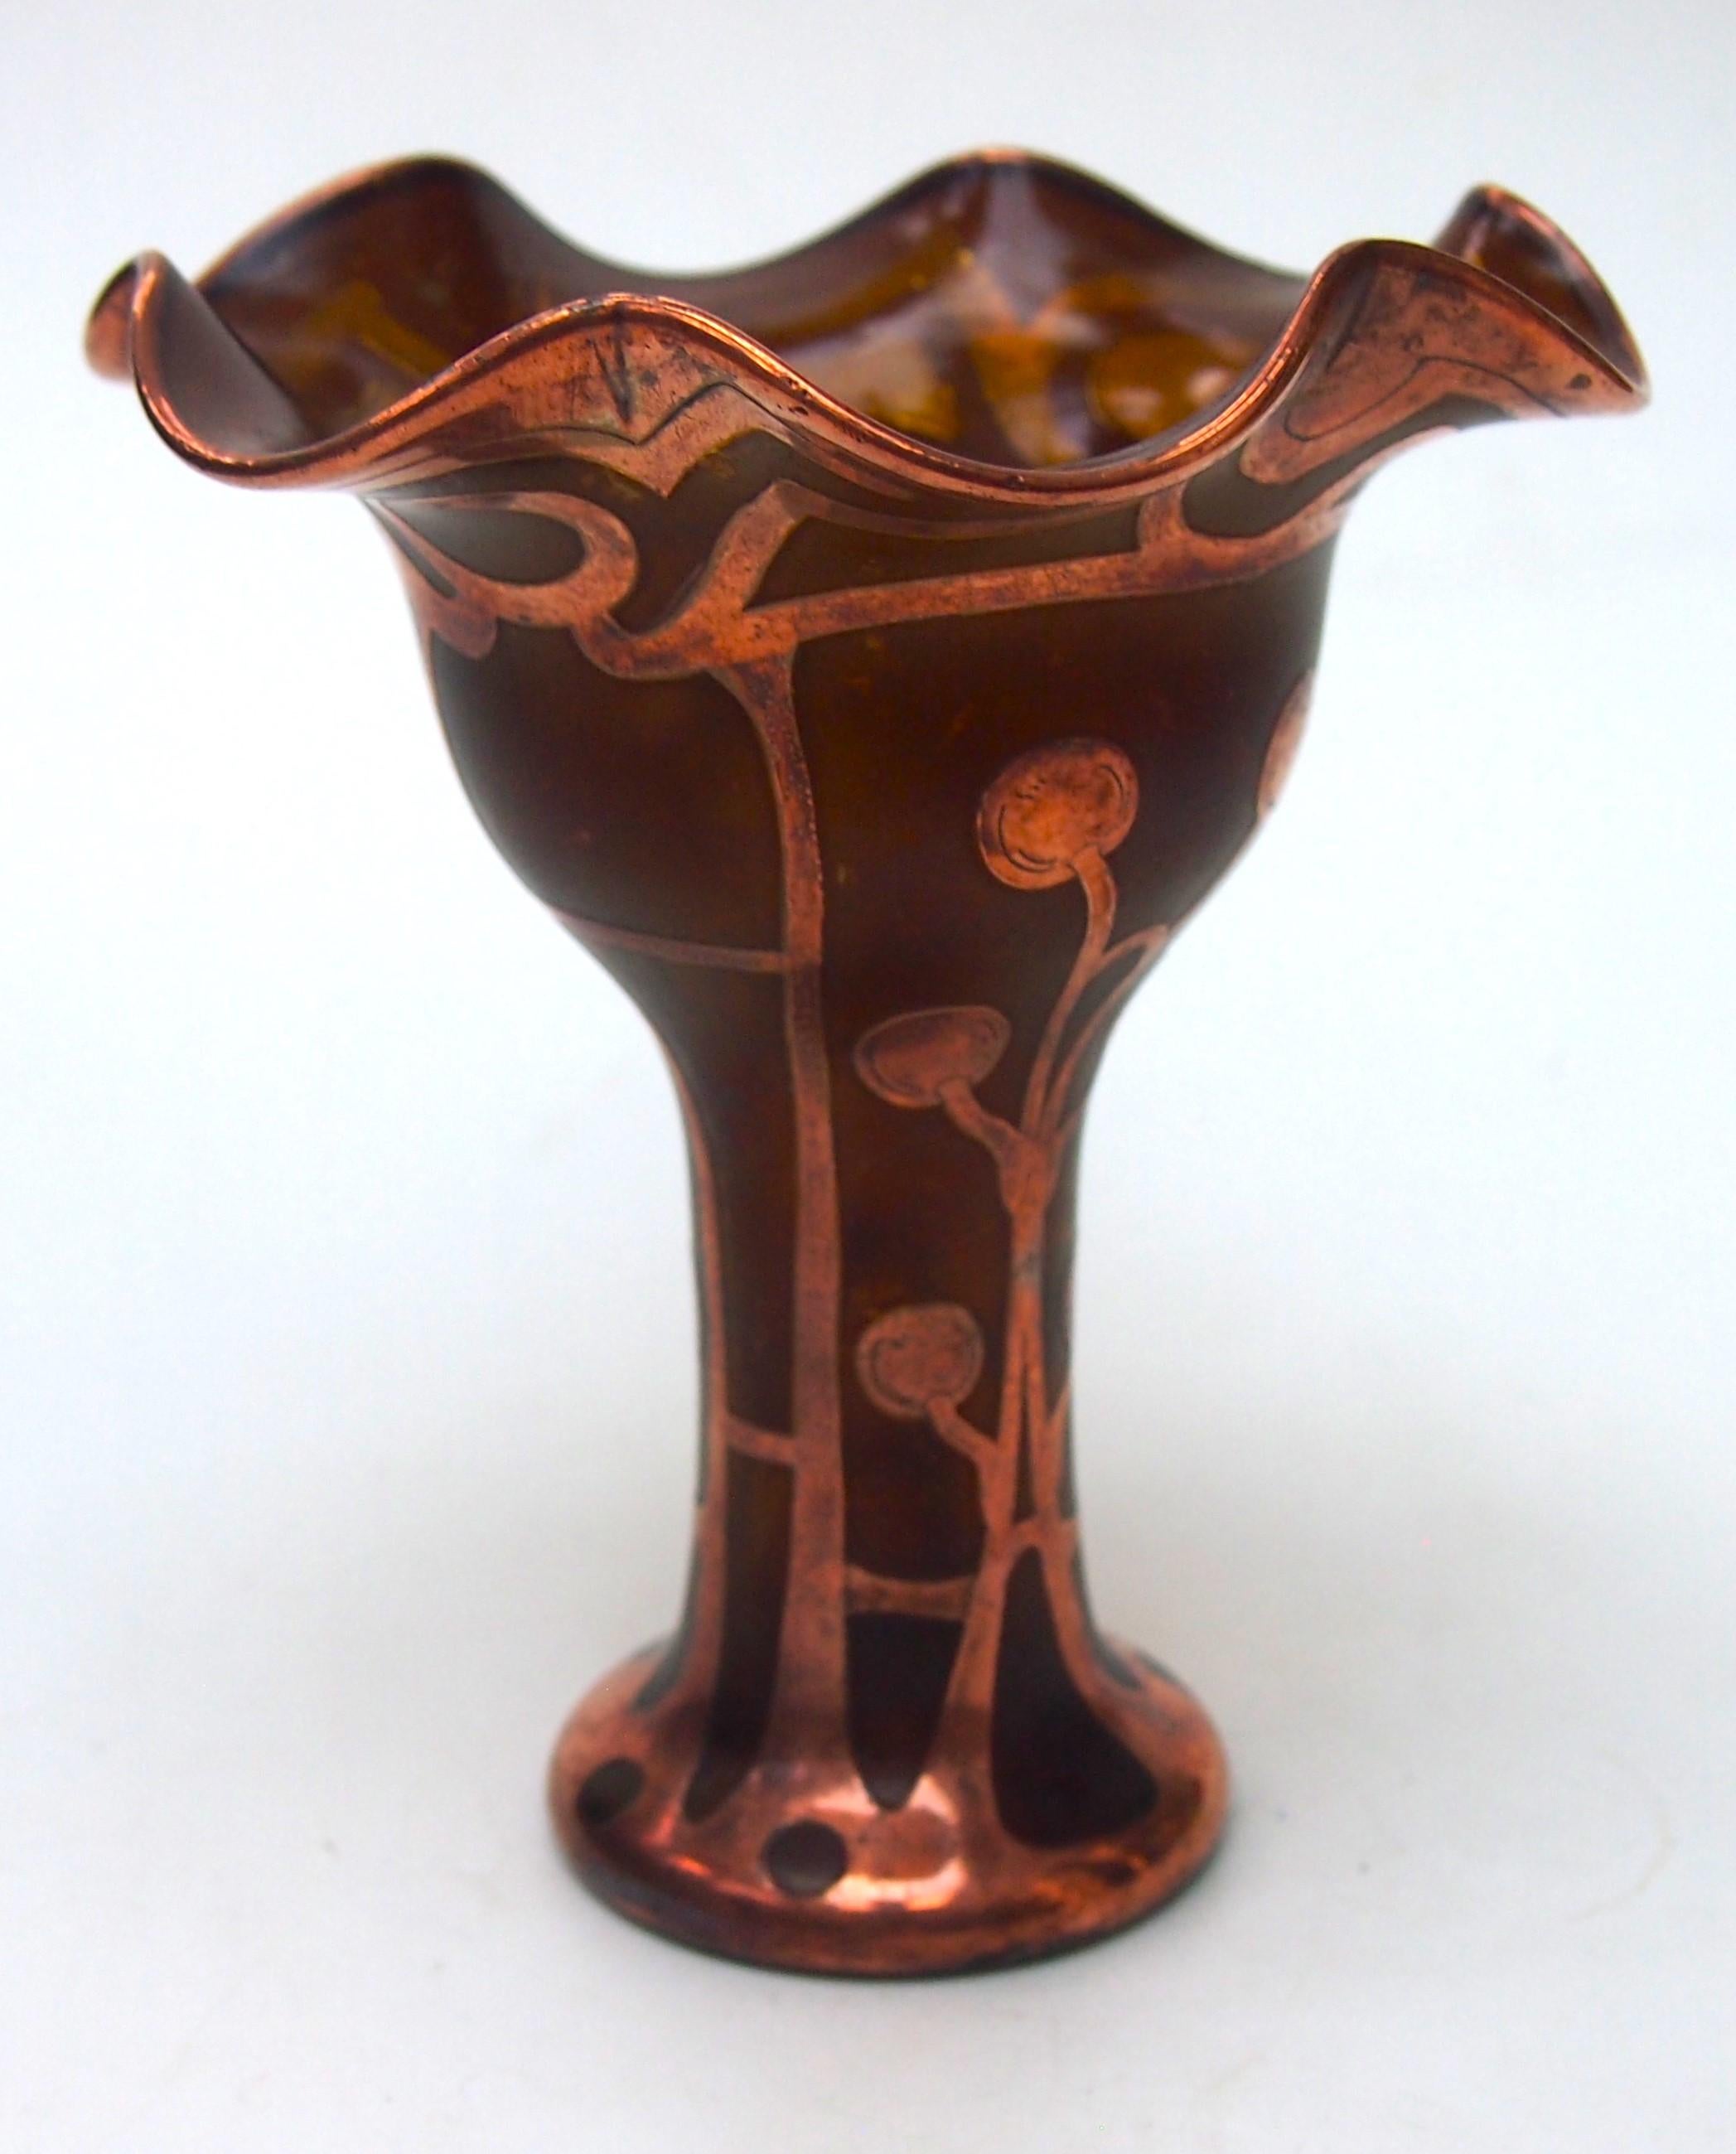 Carl Goldberg (of Haida) copper clad glass vase in the Jugendstil style (German Art Nouveau) - The glass has a speckled amber finish to make it look like metal. The vase is wavy topped and flared and the copper pattern is like stylised branches and